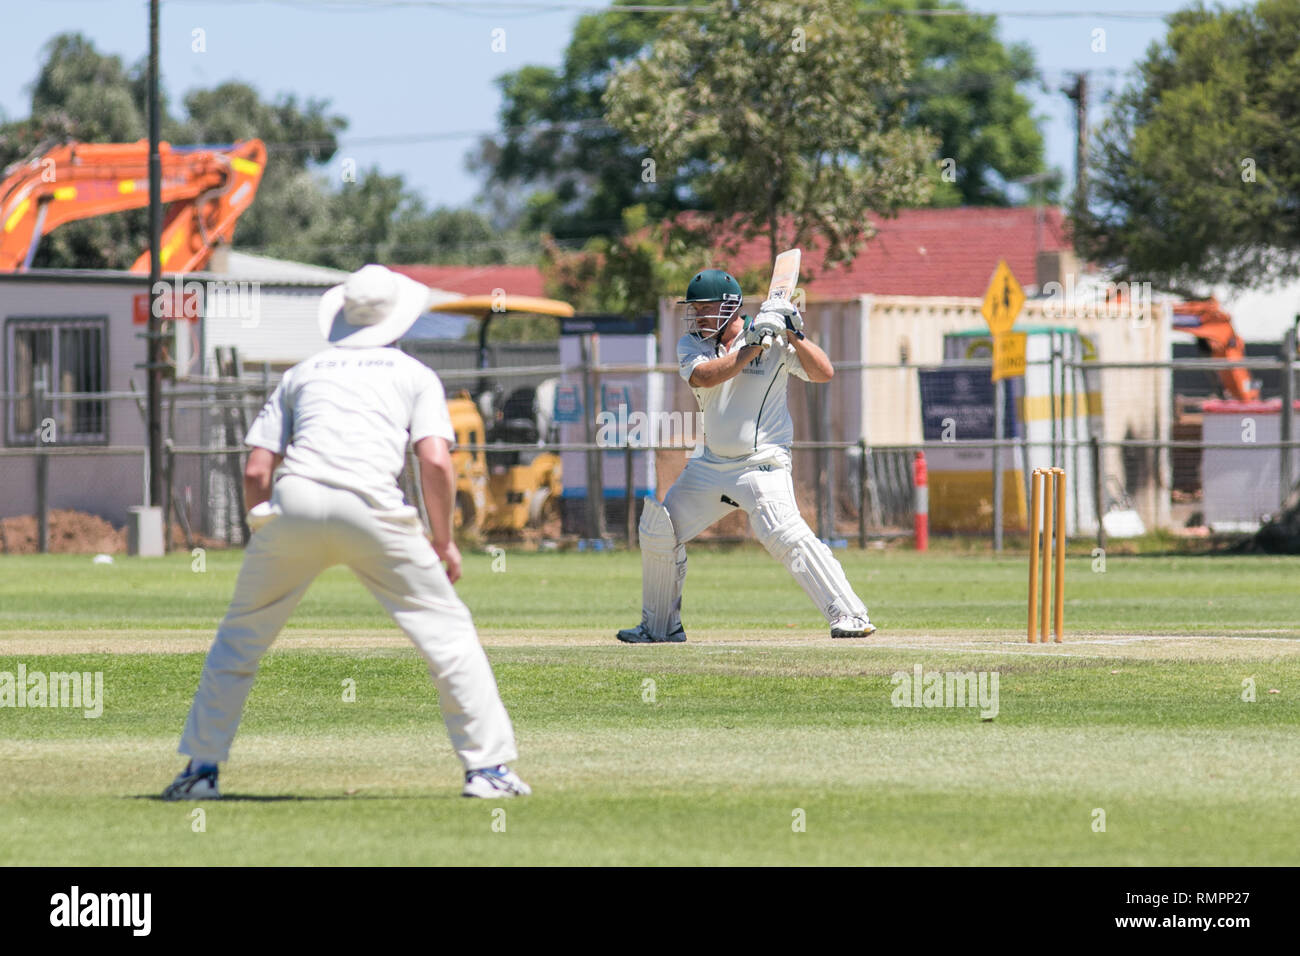 Adelaide, Australia. 16th Feb, 2019. An Associatoin Cricket match between Woodville Rechabites Cricket club and Pooraka Mighty Bulls being played at the Matheson Reserve on a hot saturday afternoon with temperatures of 29 degrees celsius Credit: amer ghazzal/Alamy Live News Stock Photo